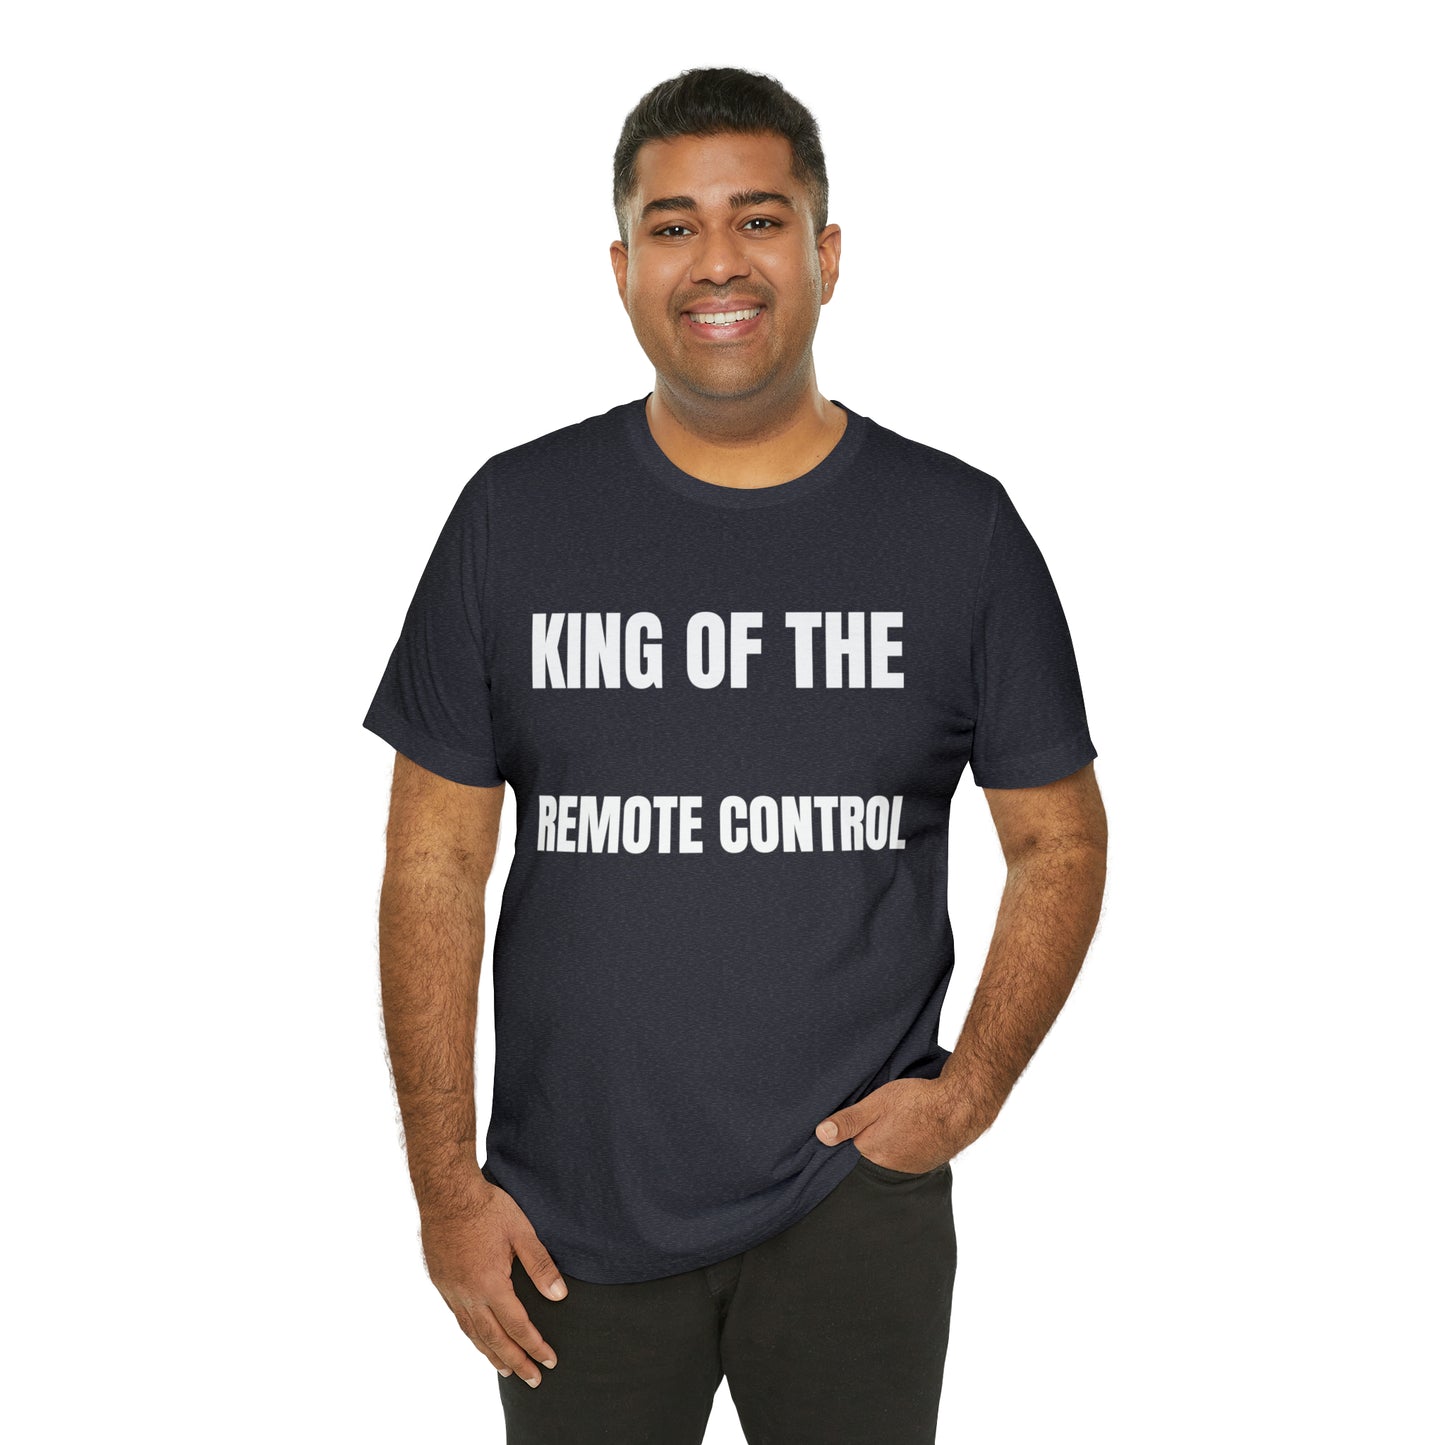 Unisex Jersey Tee: Short Sleeve, King of the Remote Control Design